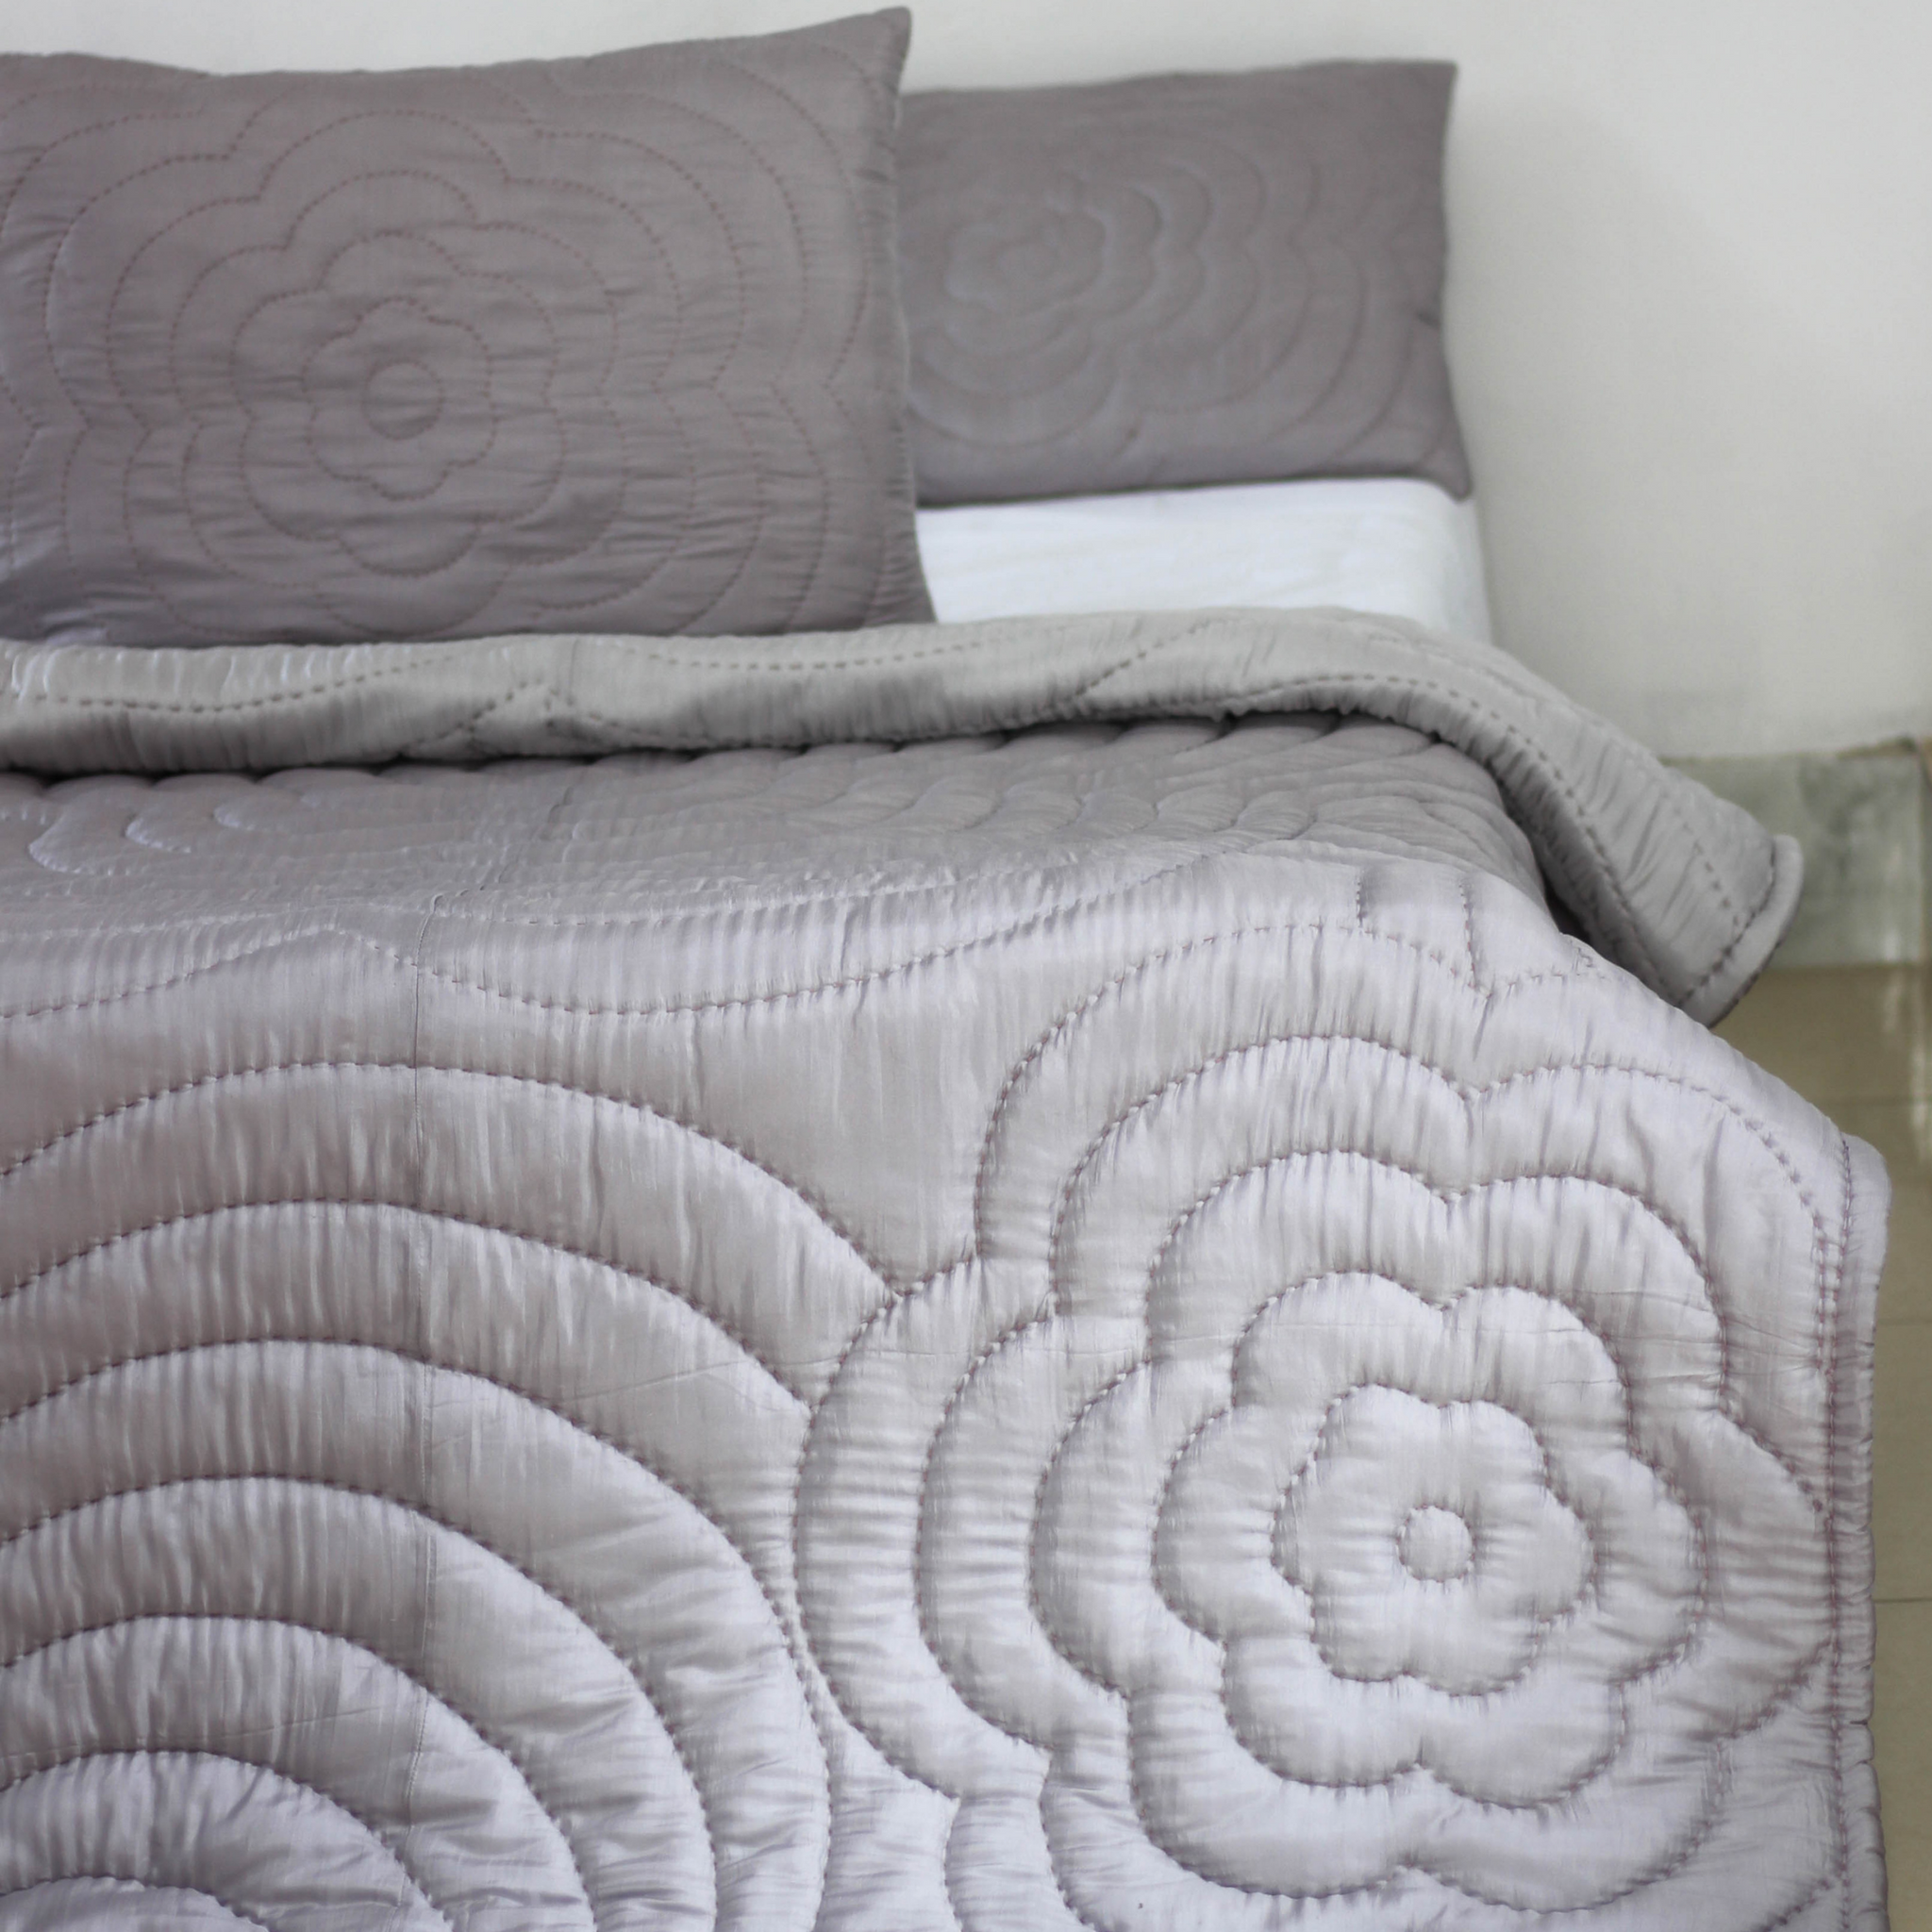 Mulberry Silk Comforter Set - Quilt and Shams - Blossom Hand Stitching